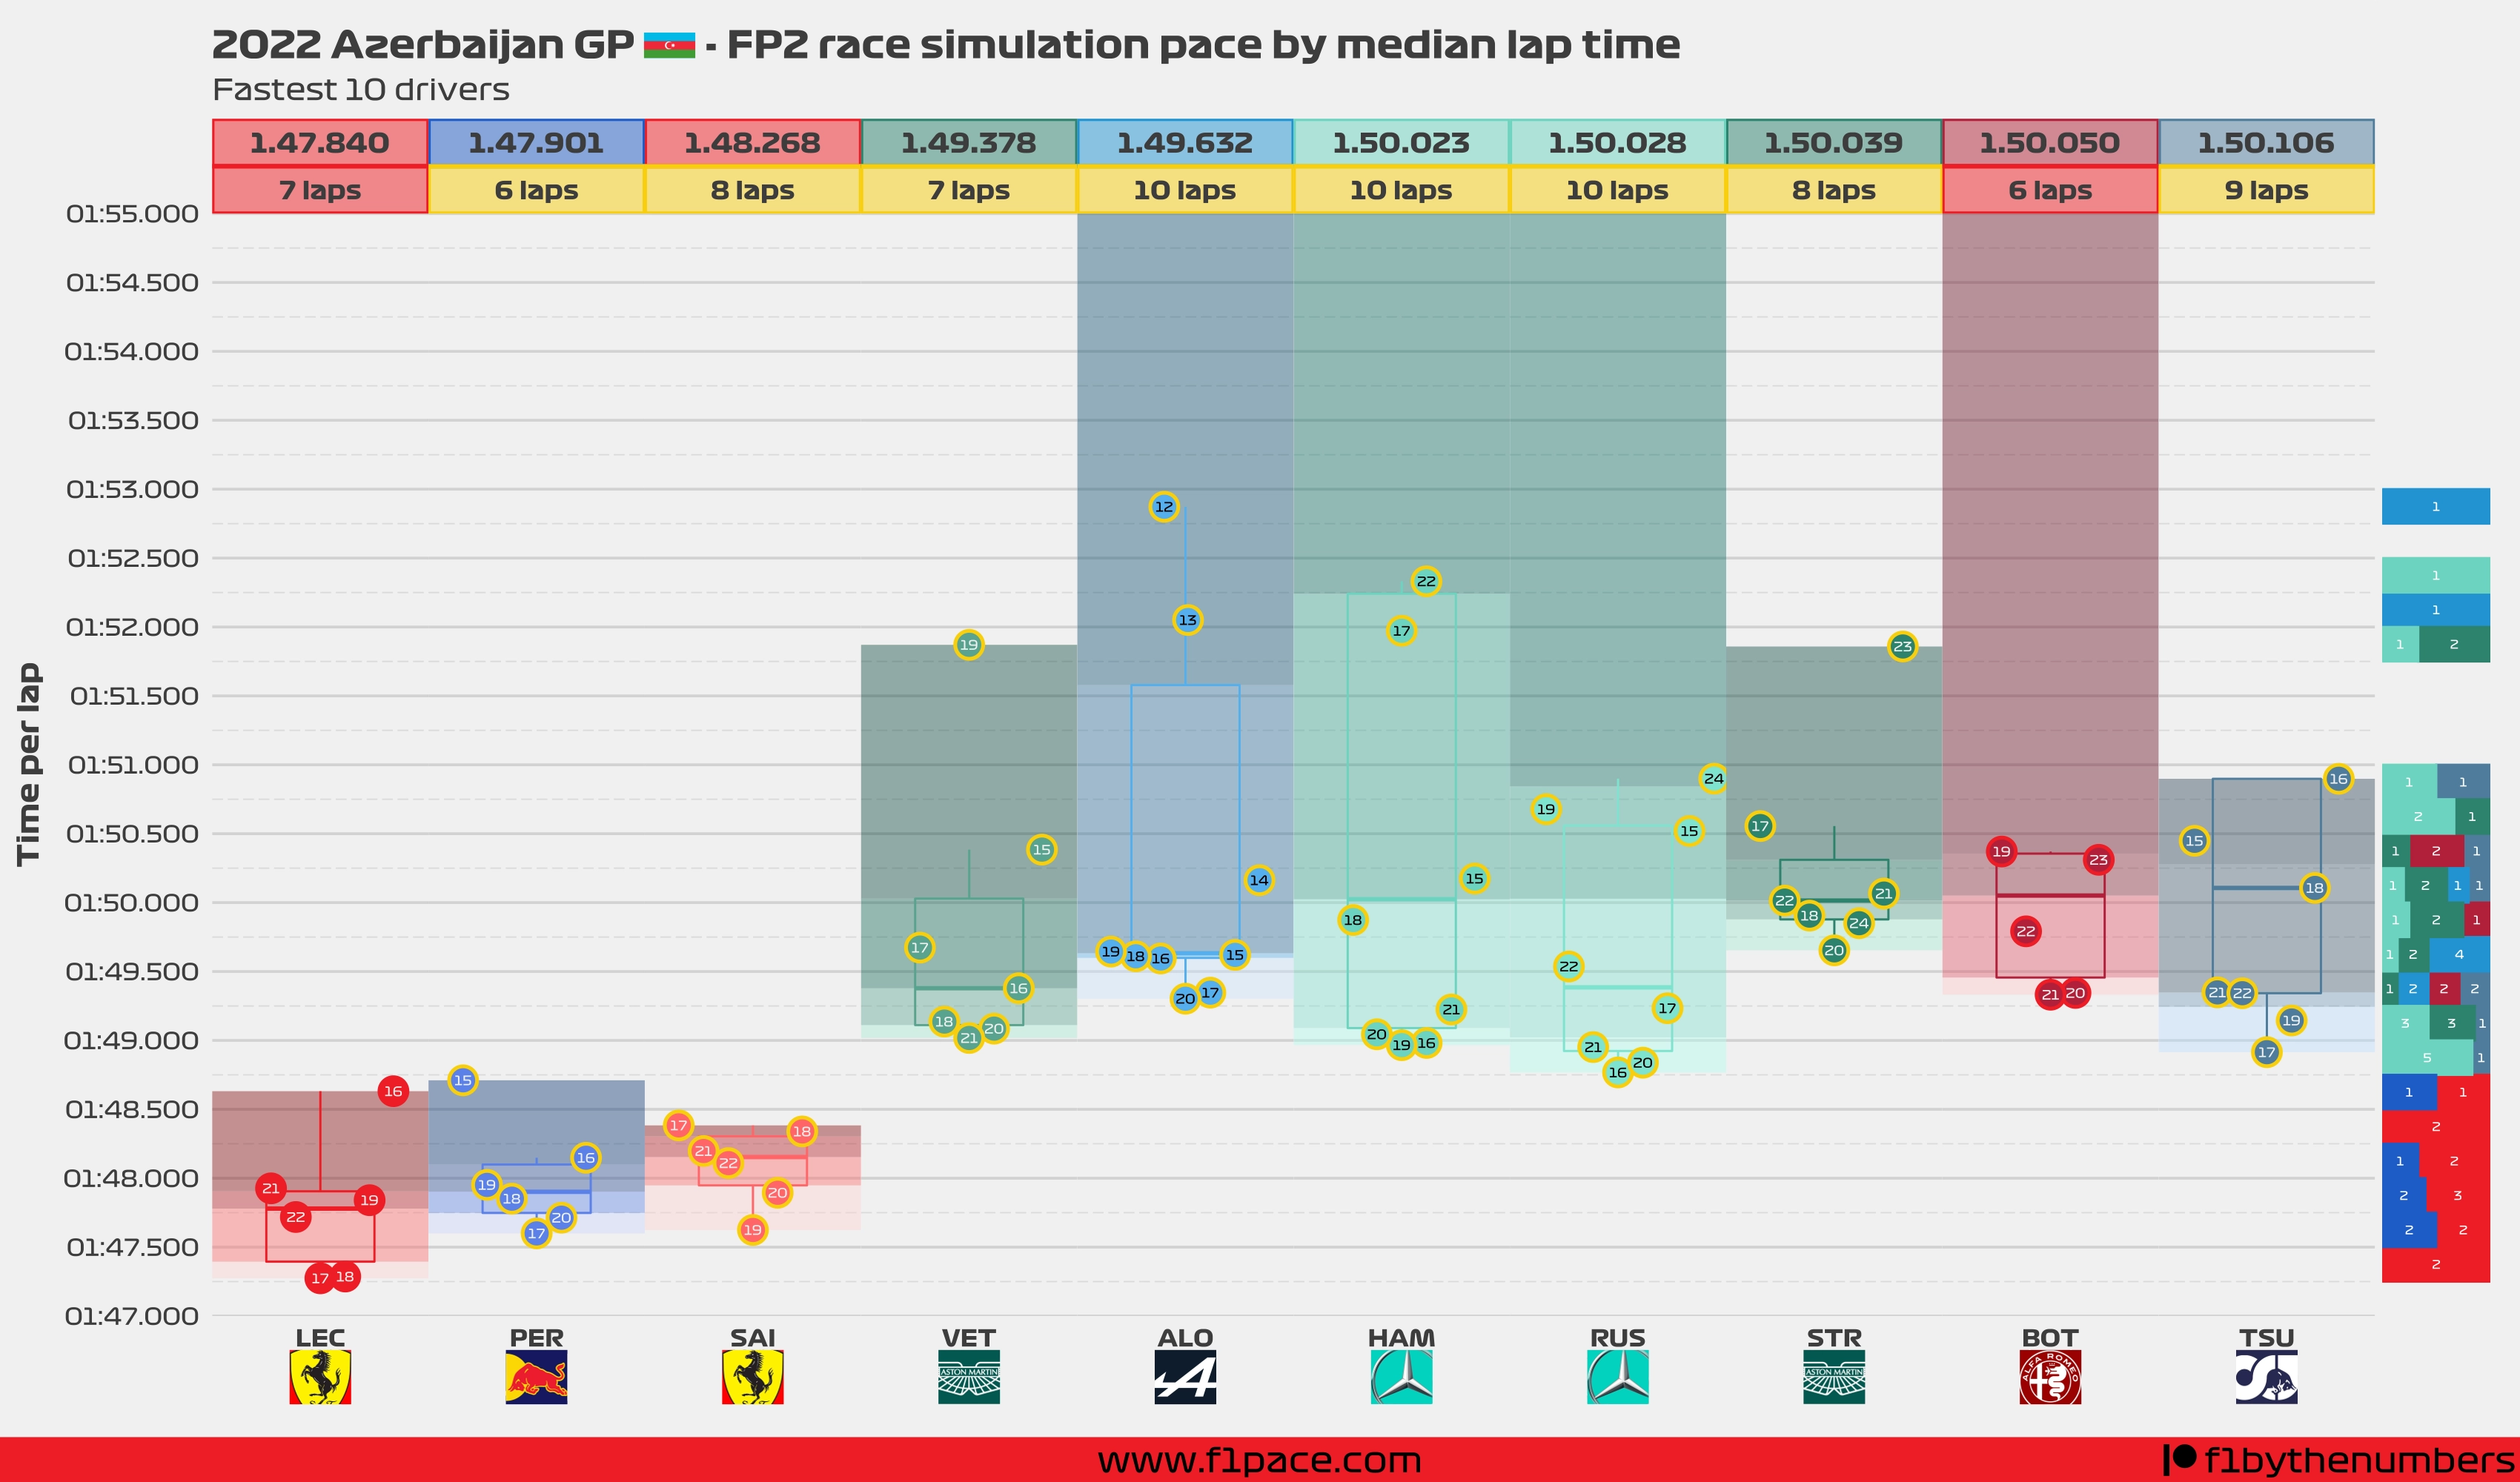 Race simulation pace: Top 10 drivers